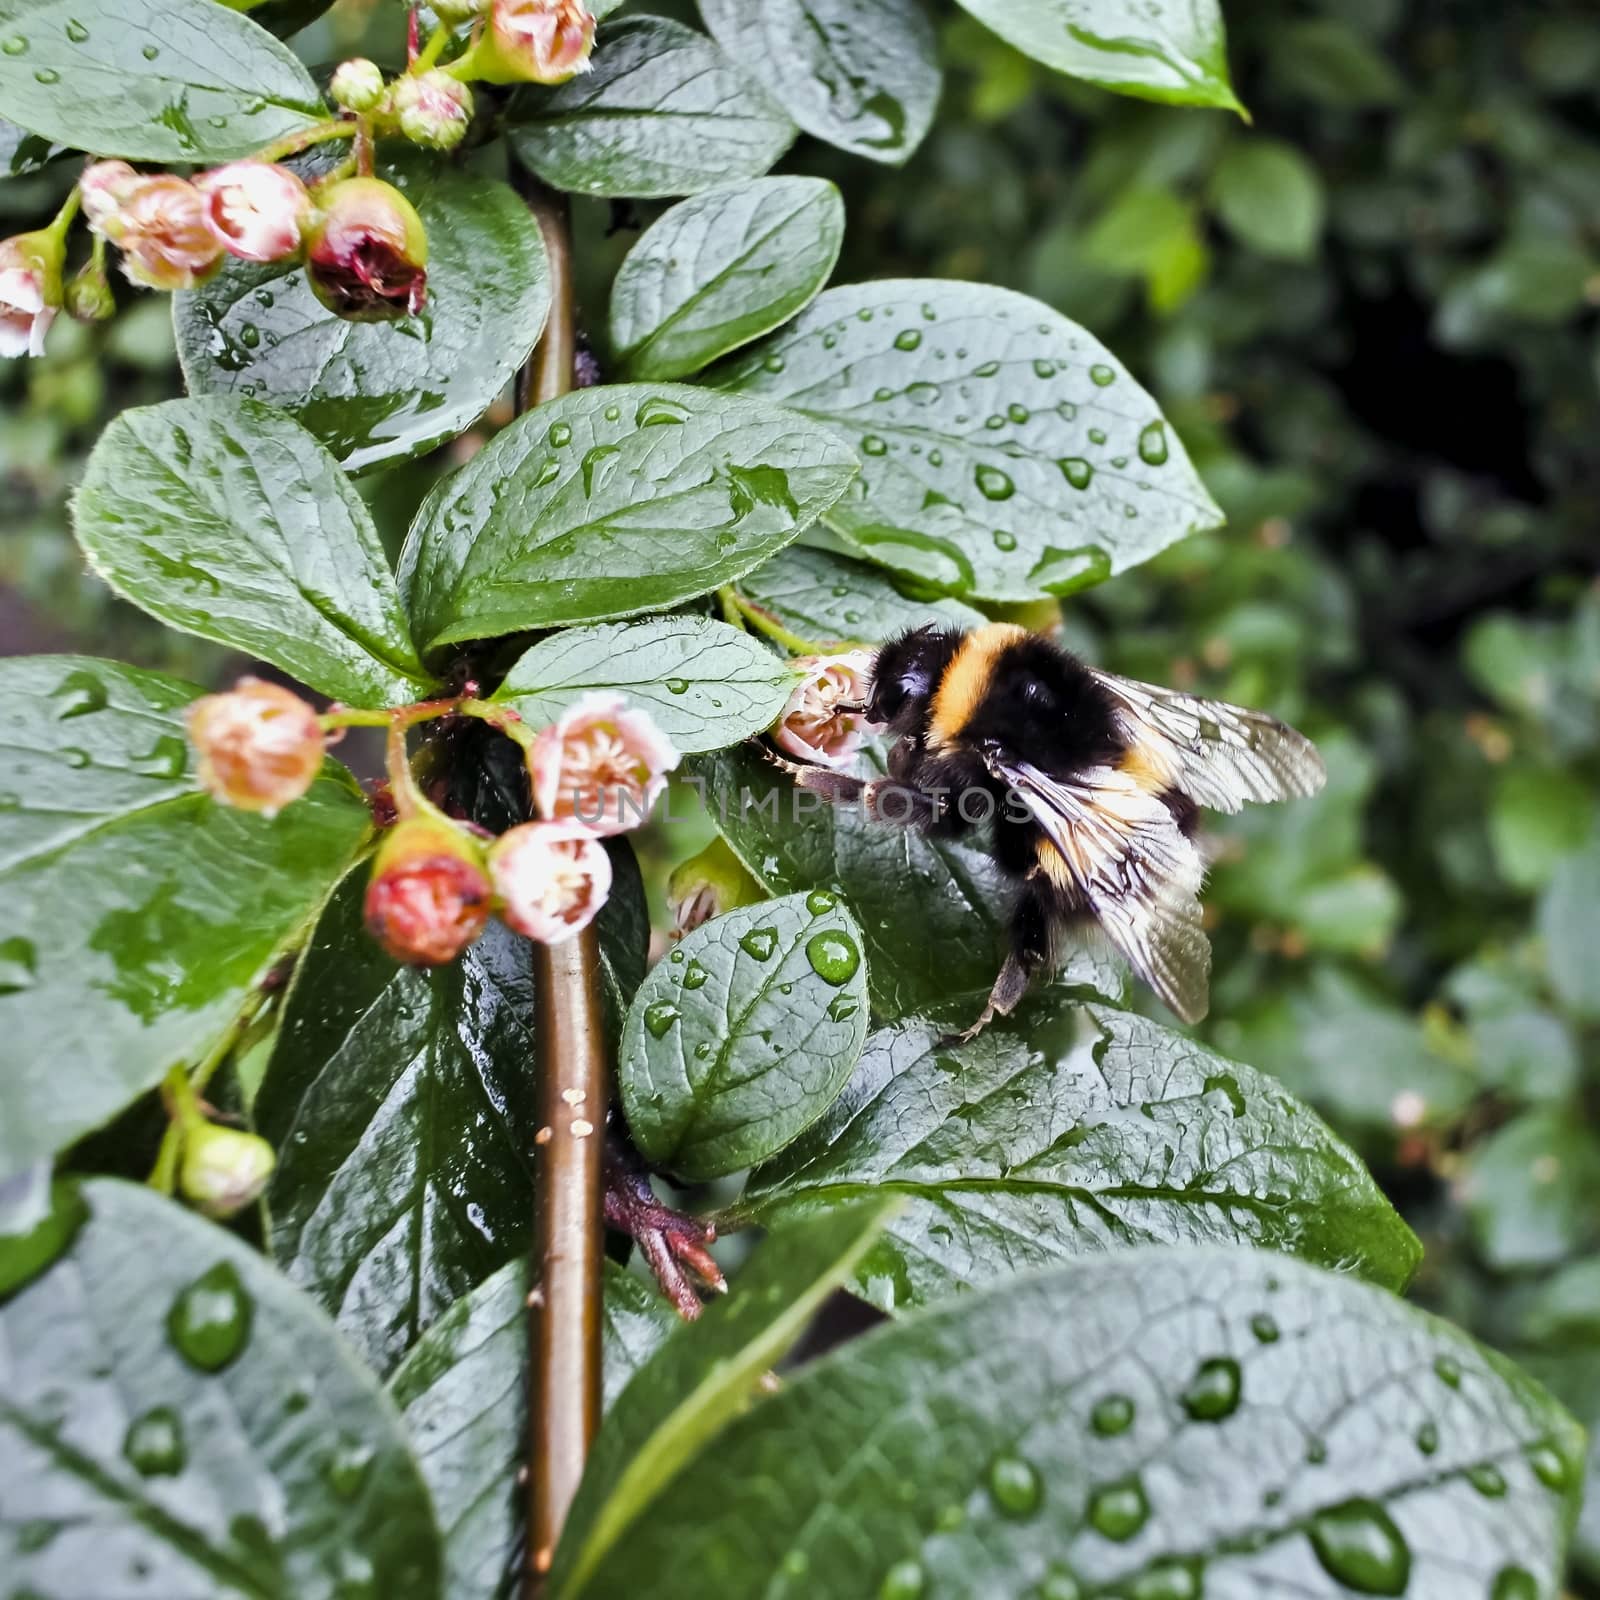 bumblebee collects nectar after the rain on wet Bush by valerypetr